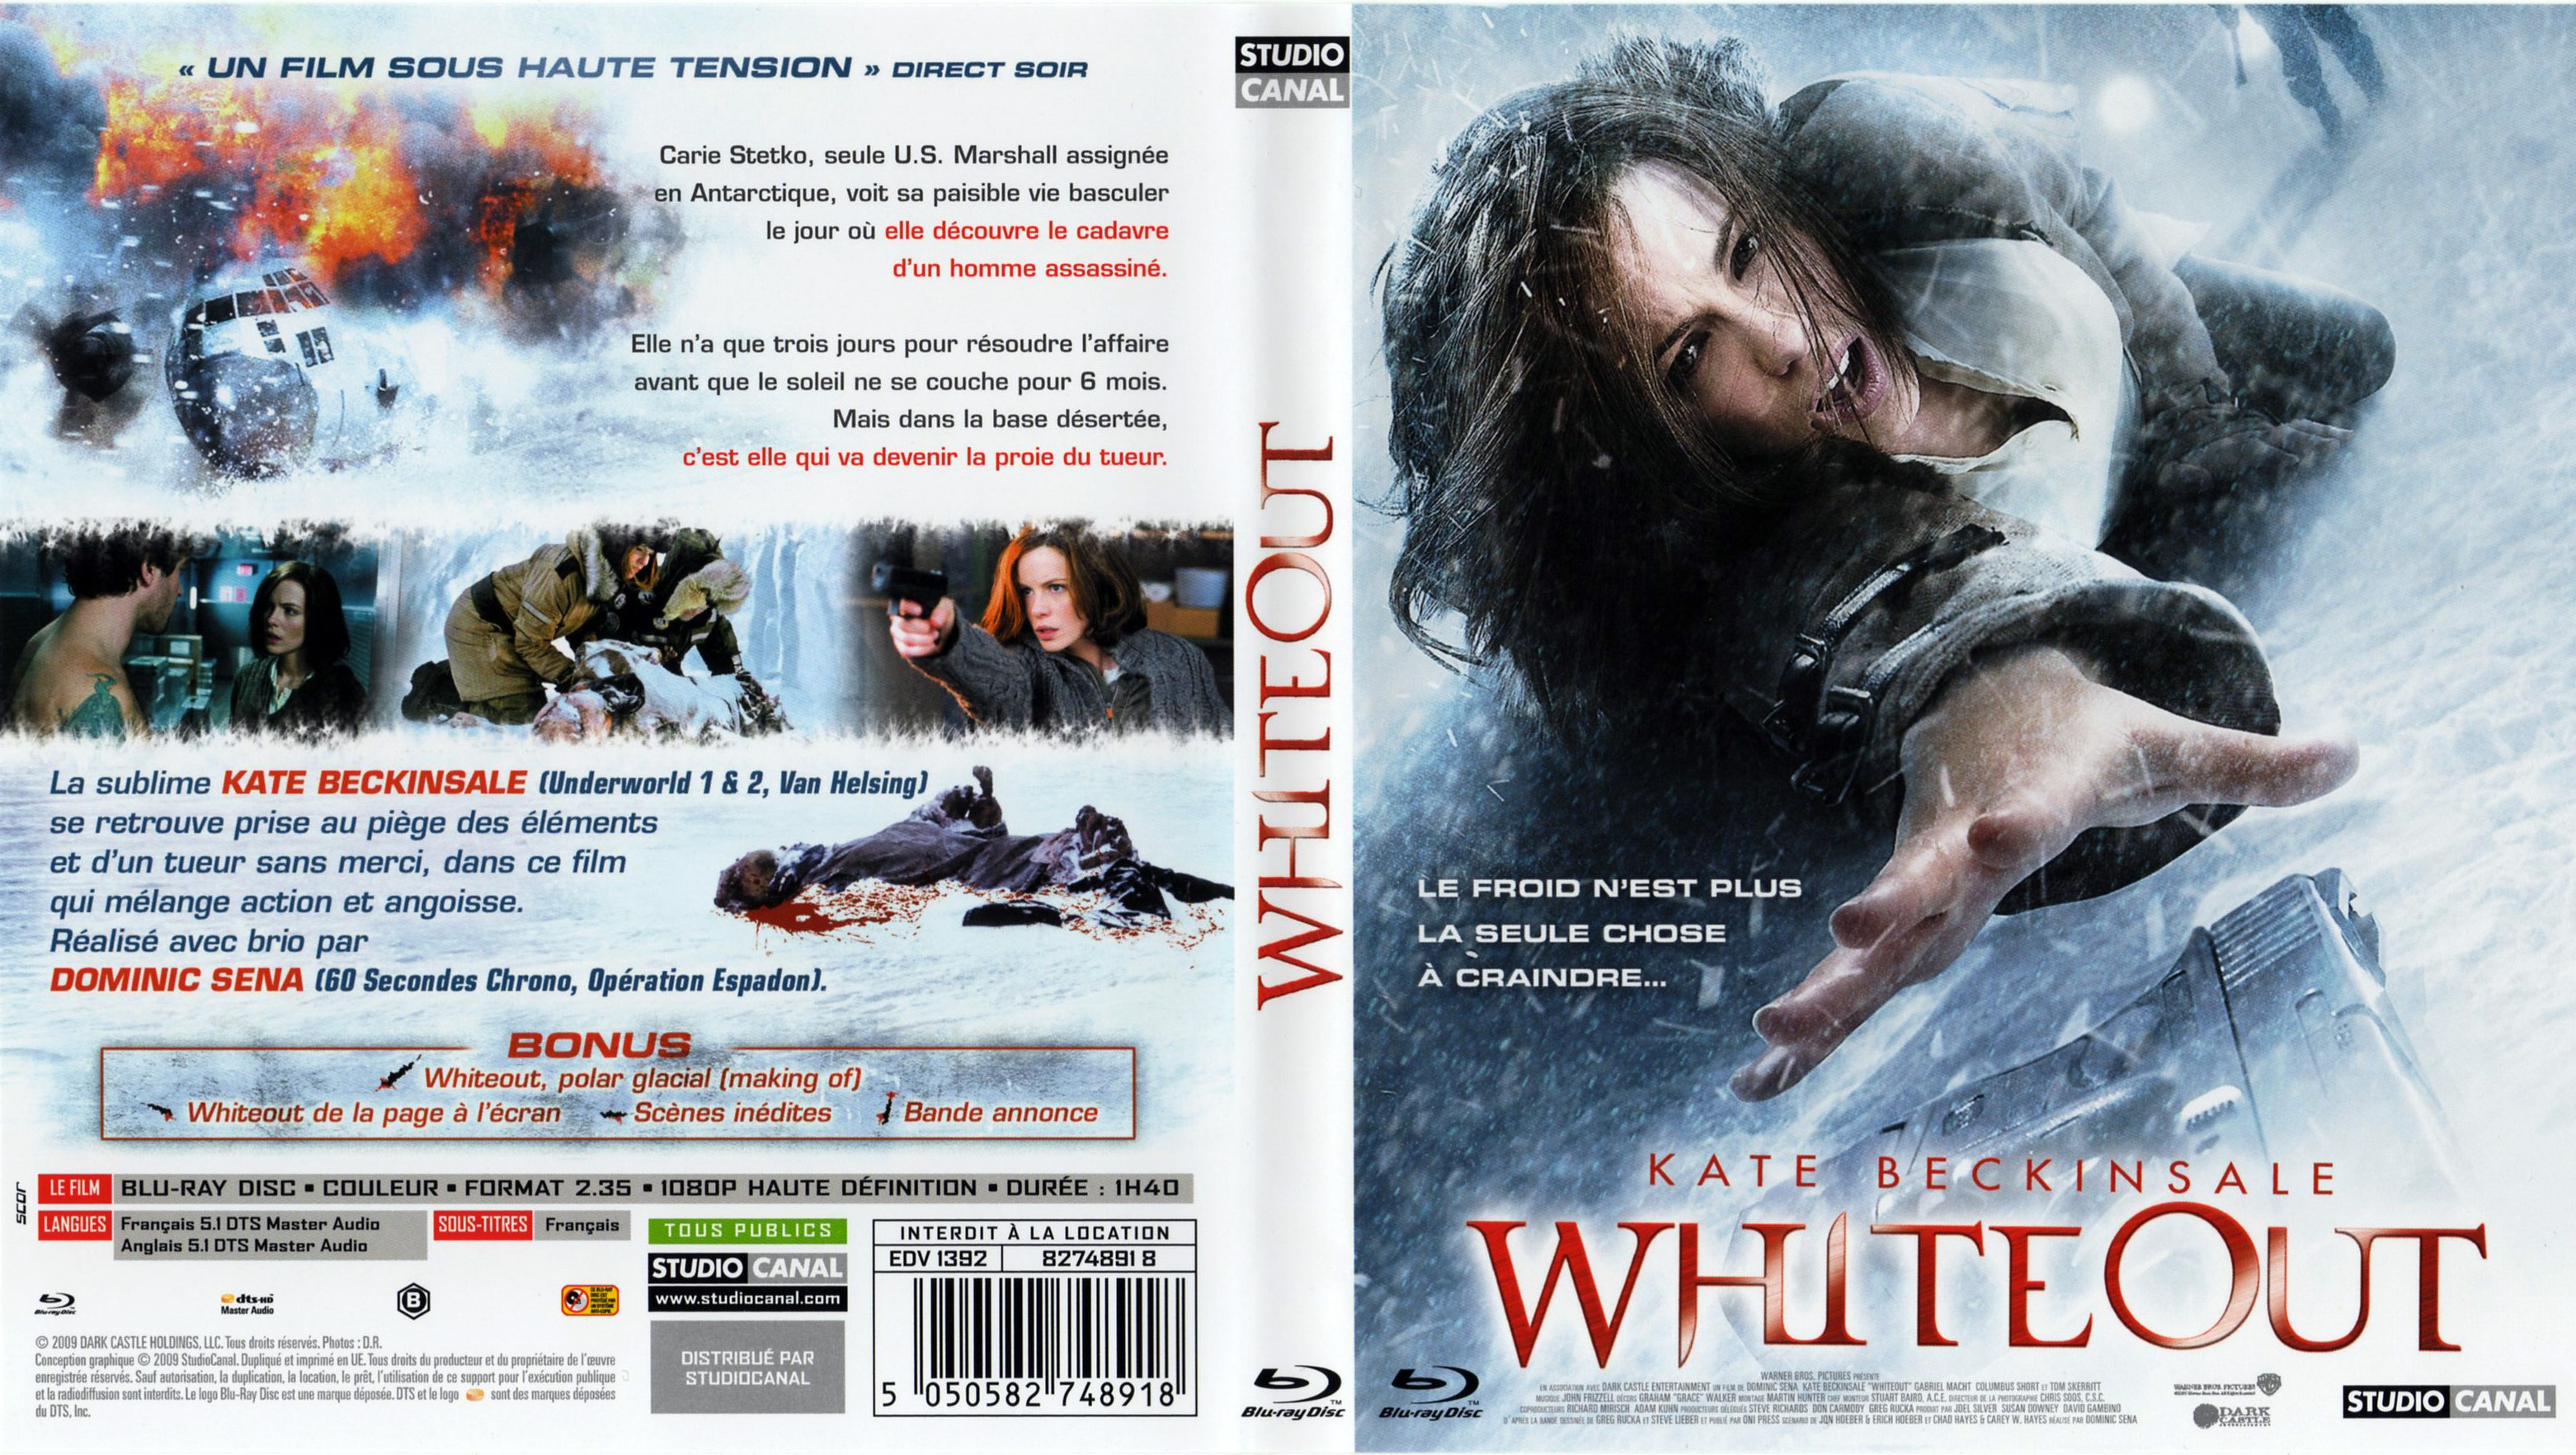 Jaquette DVD Whiteout (BLU-RAY)